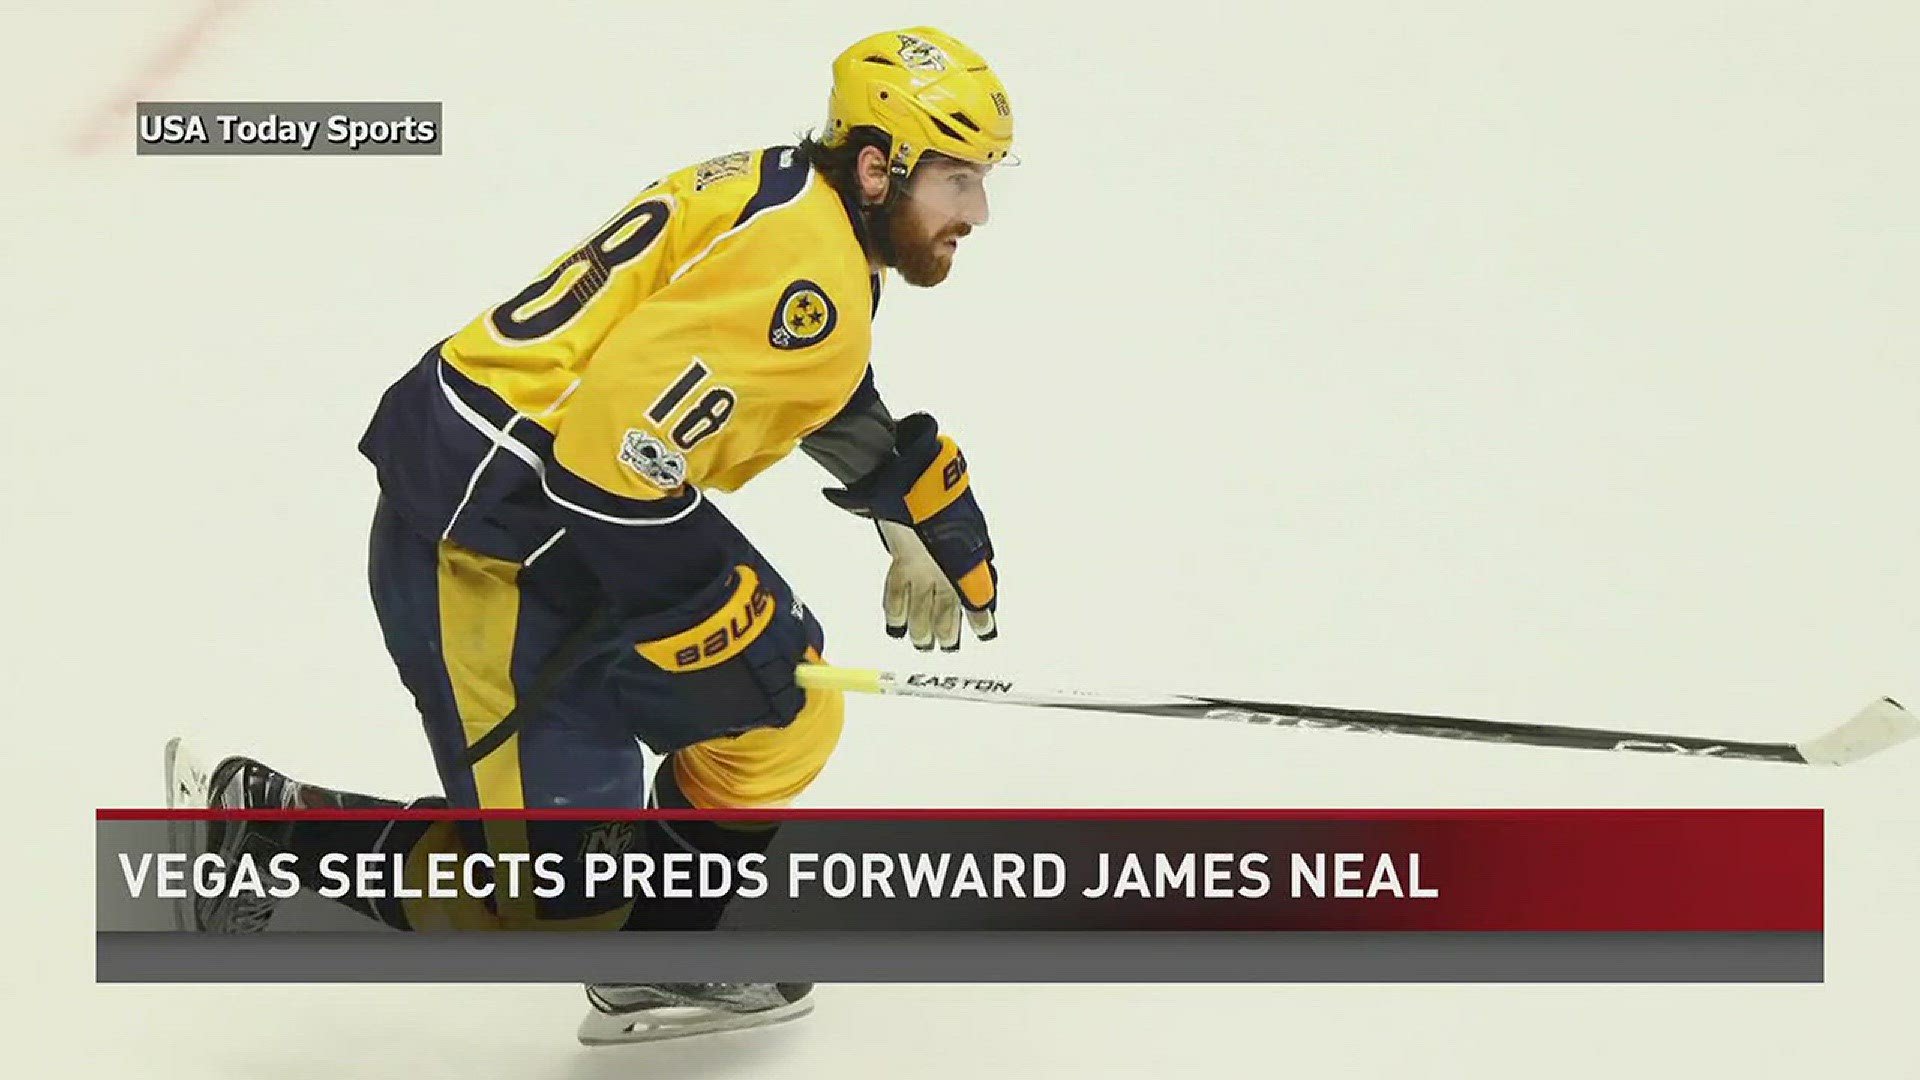 The Vegas Golden Knights select Preds forward James Neal in the 2017 NHL Expansion Draft.